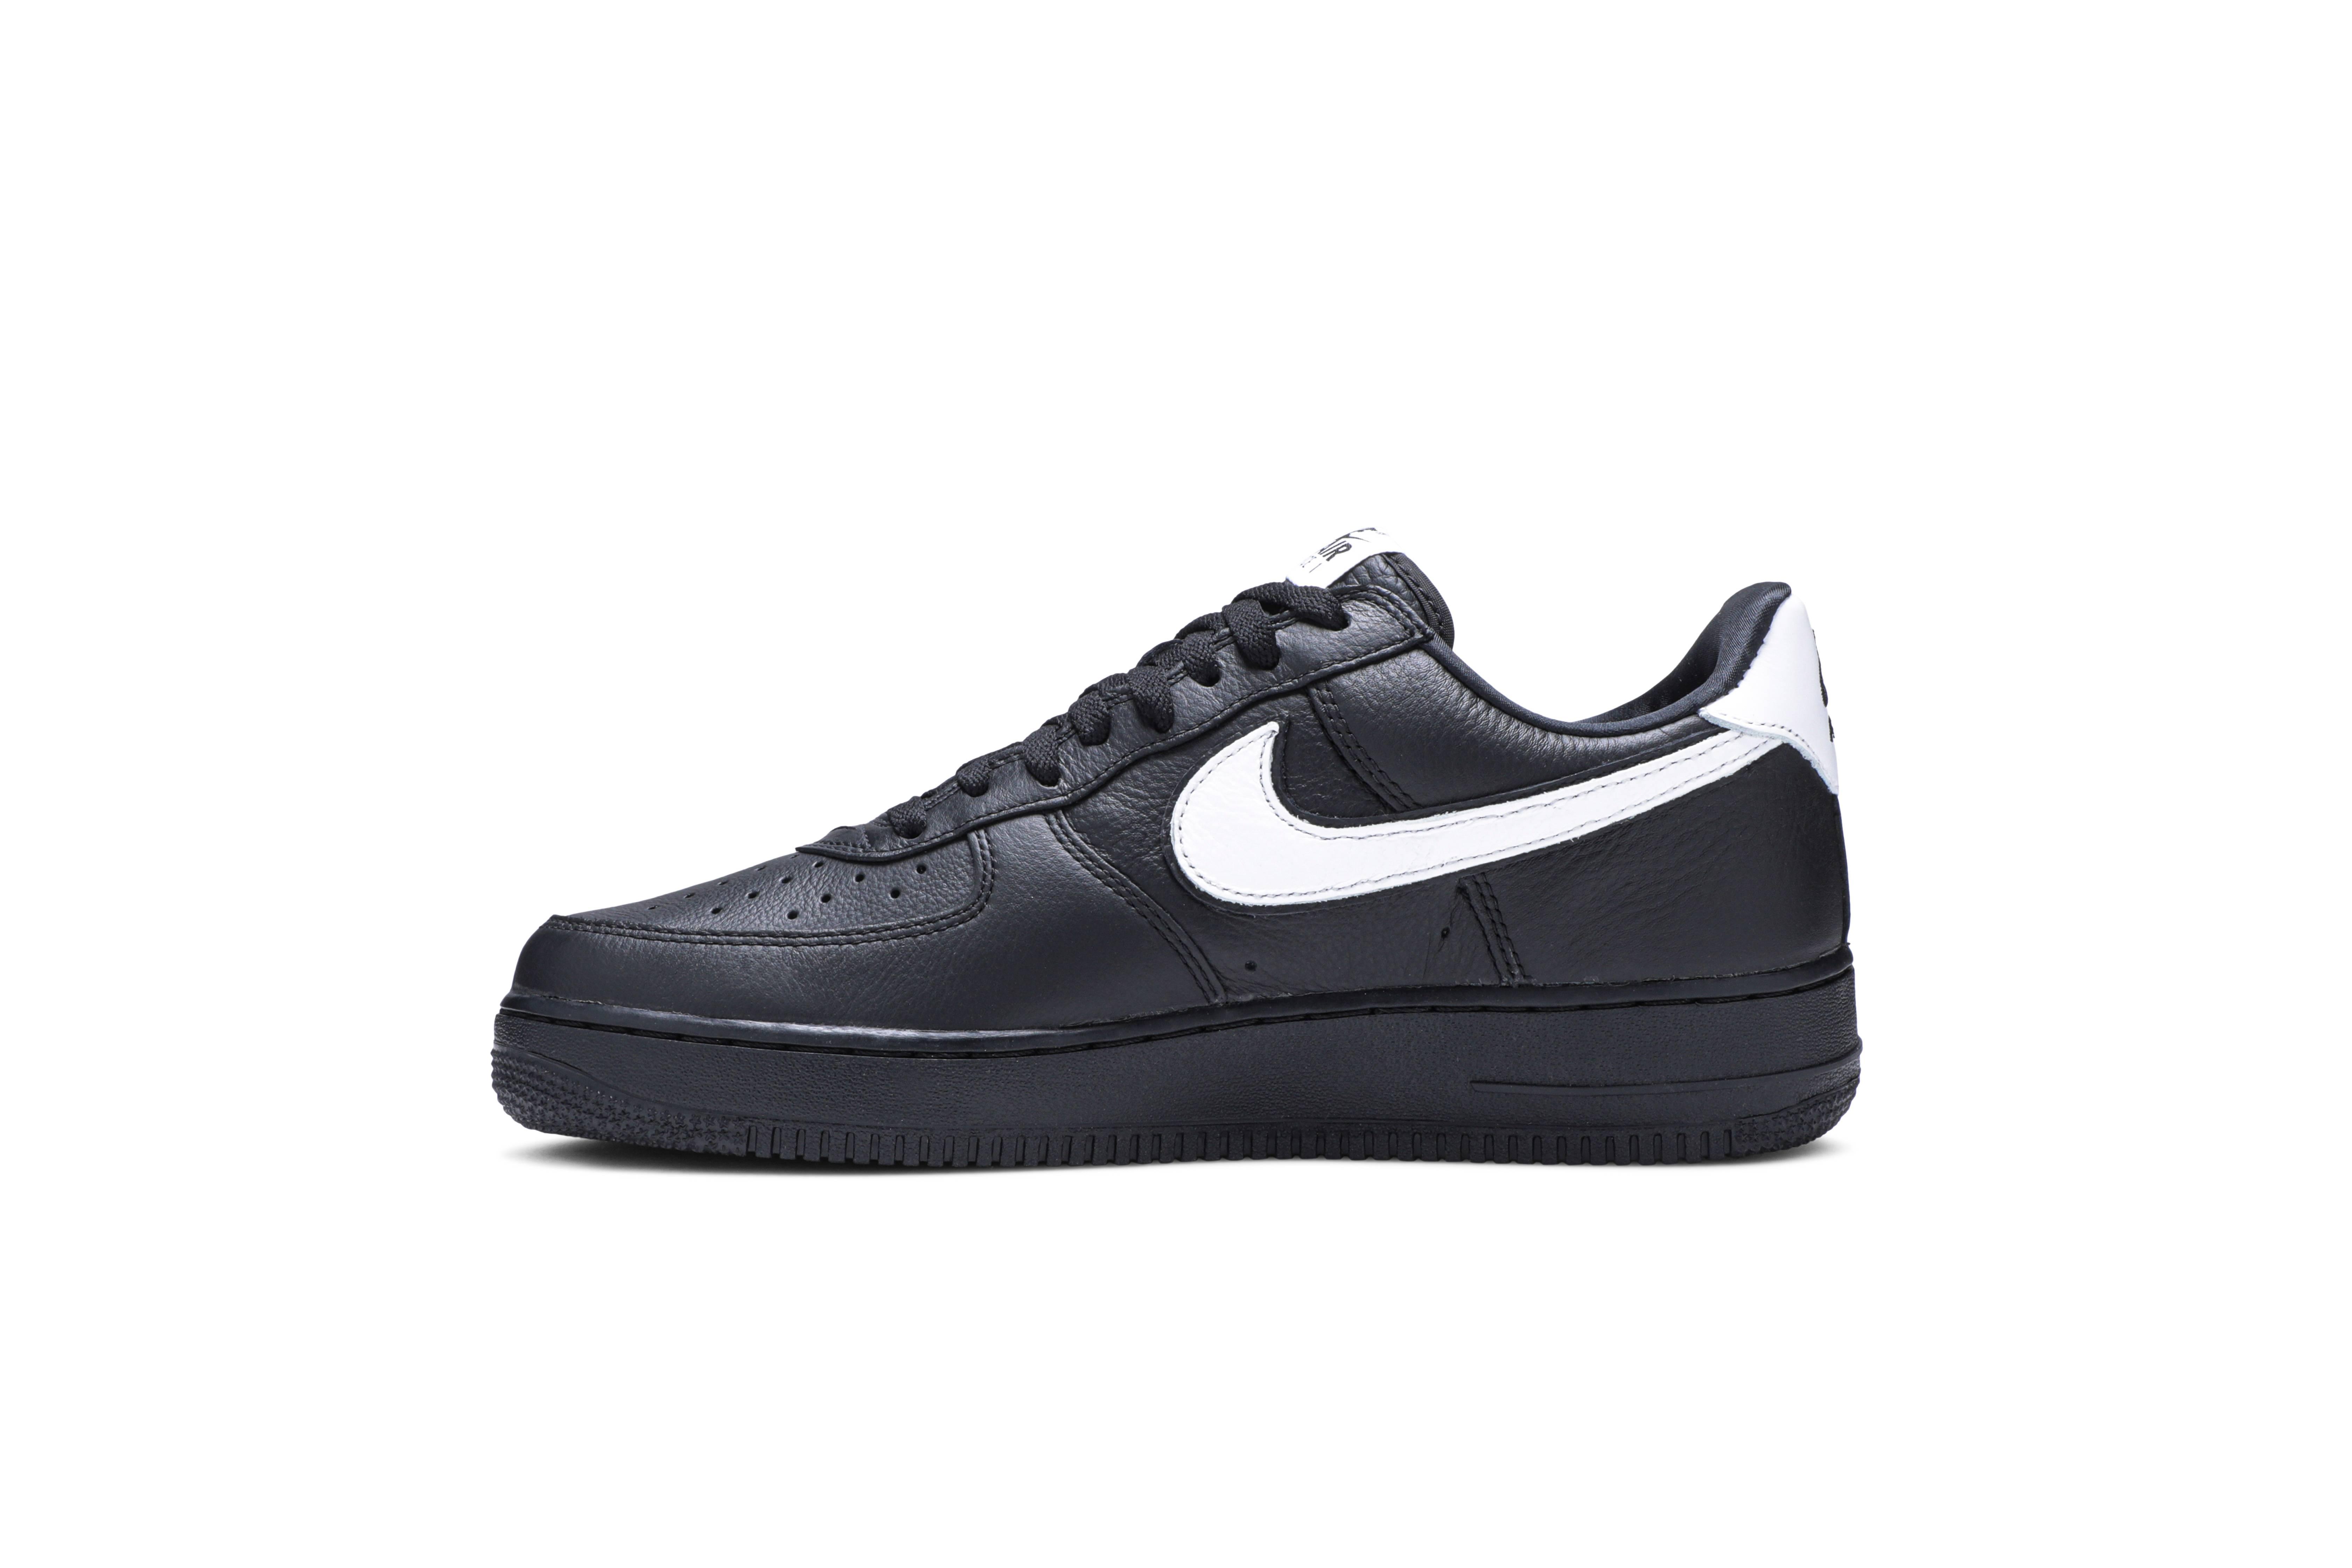 Nike Leather Air Force 1 Low Retro in Black/White (Black) for Men - Save  89% - Lyst